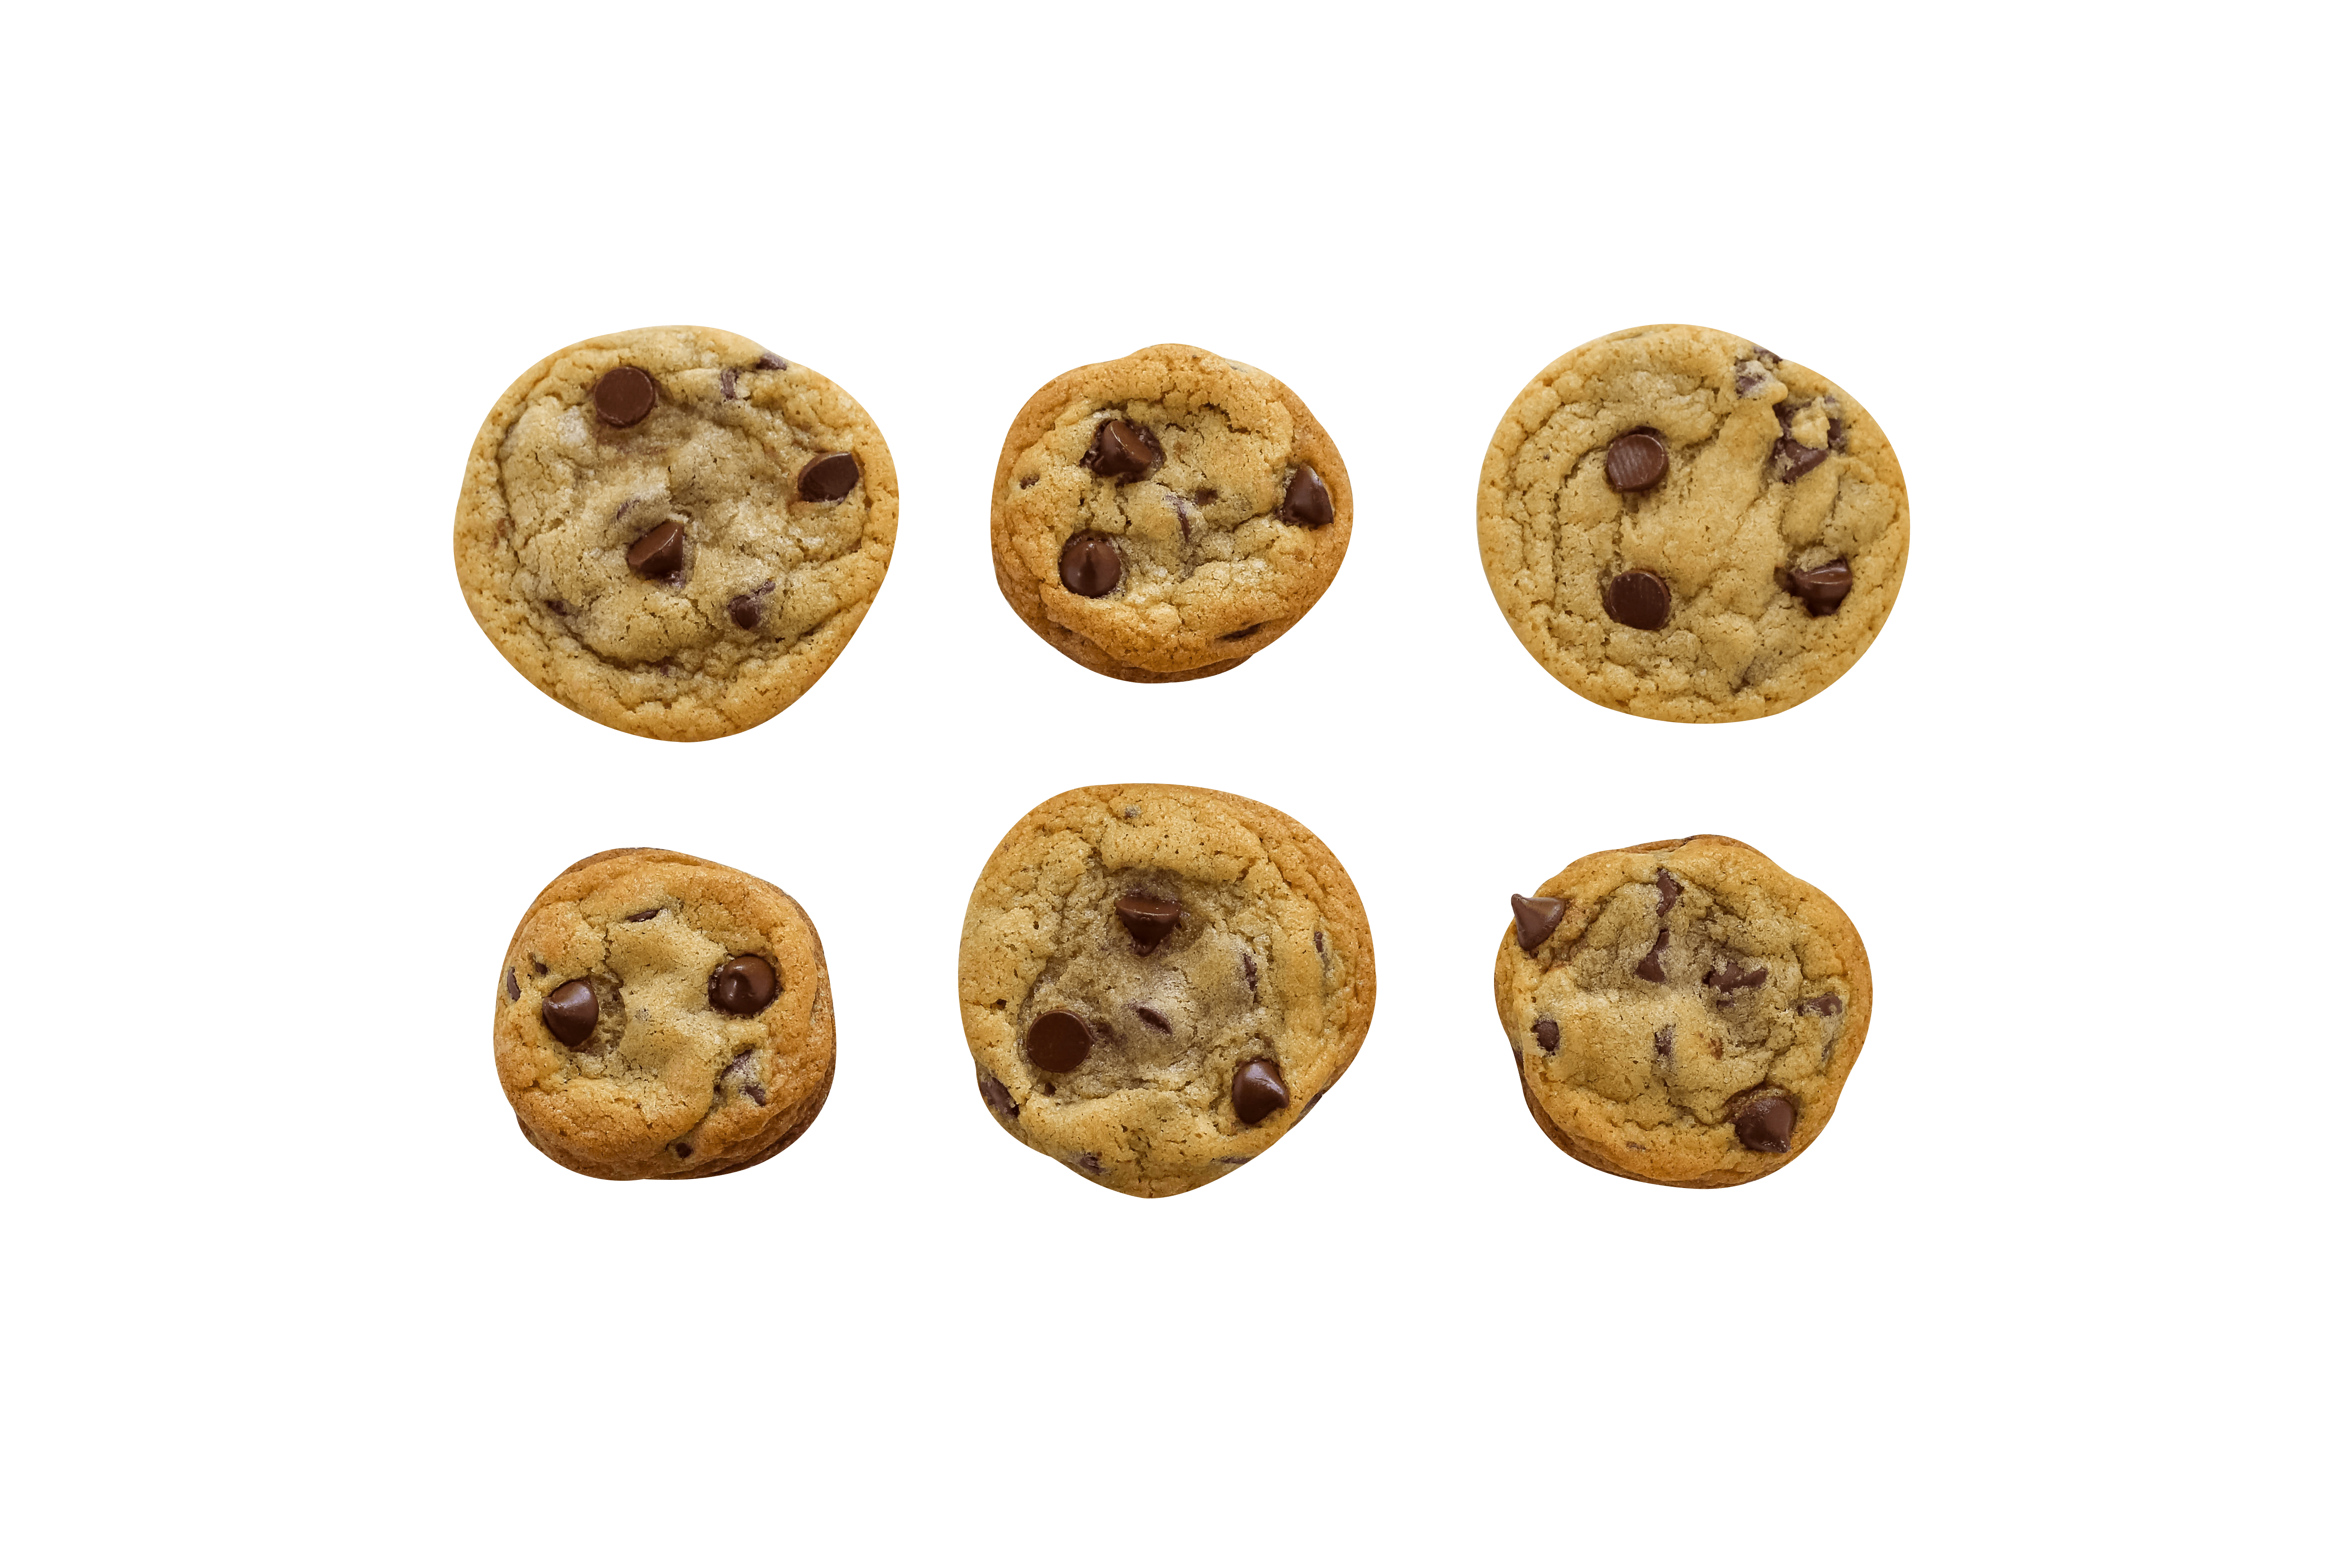 Six cookies baked on different baking sheets